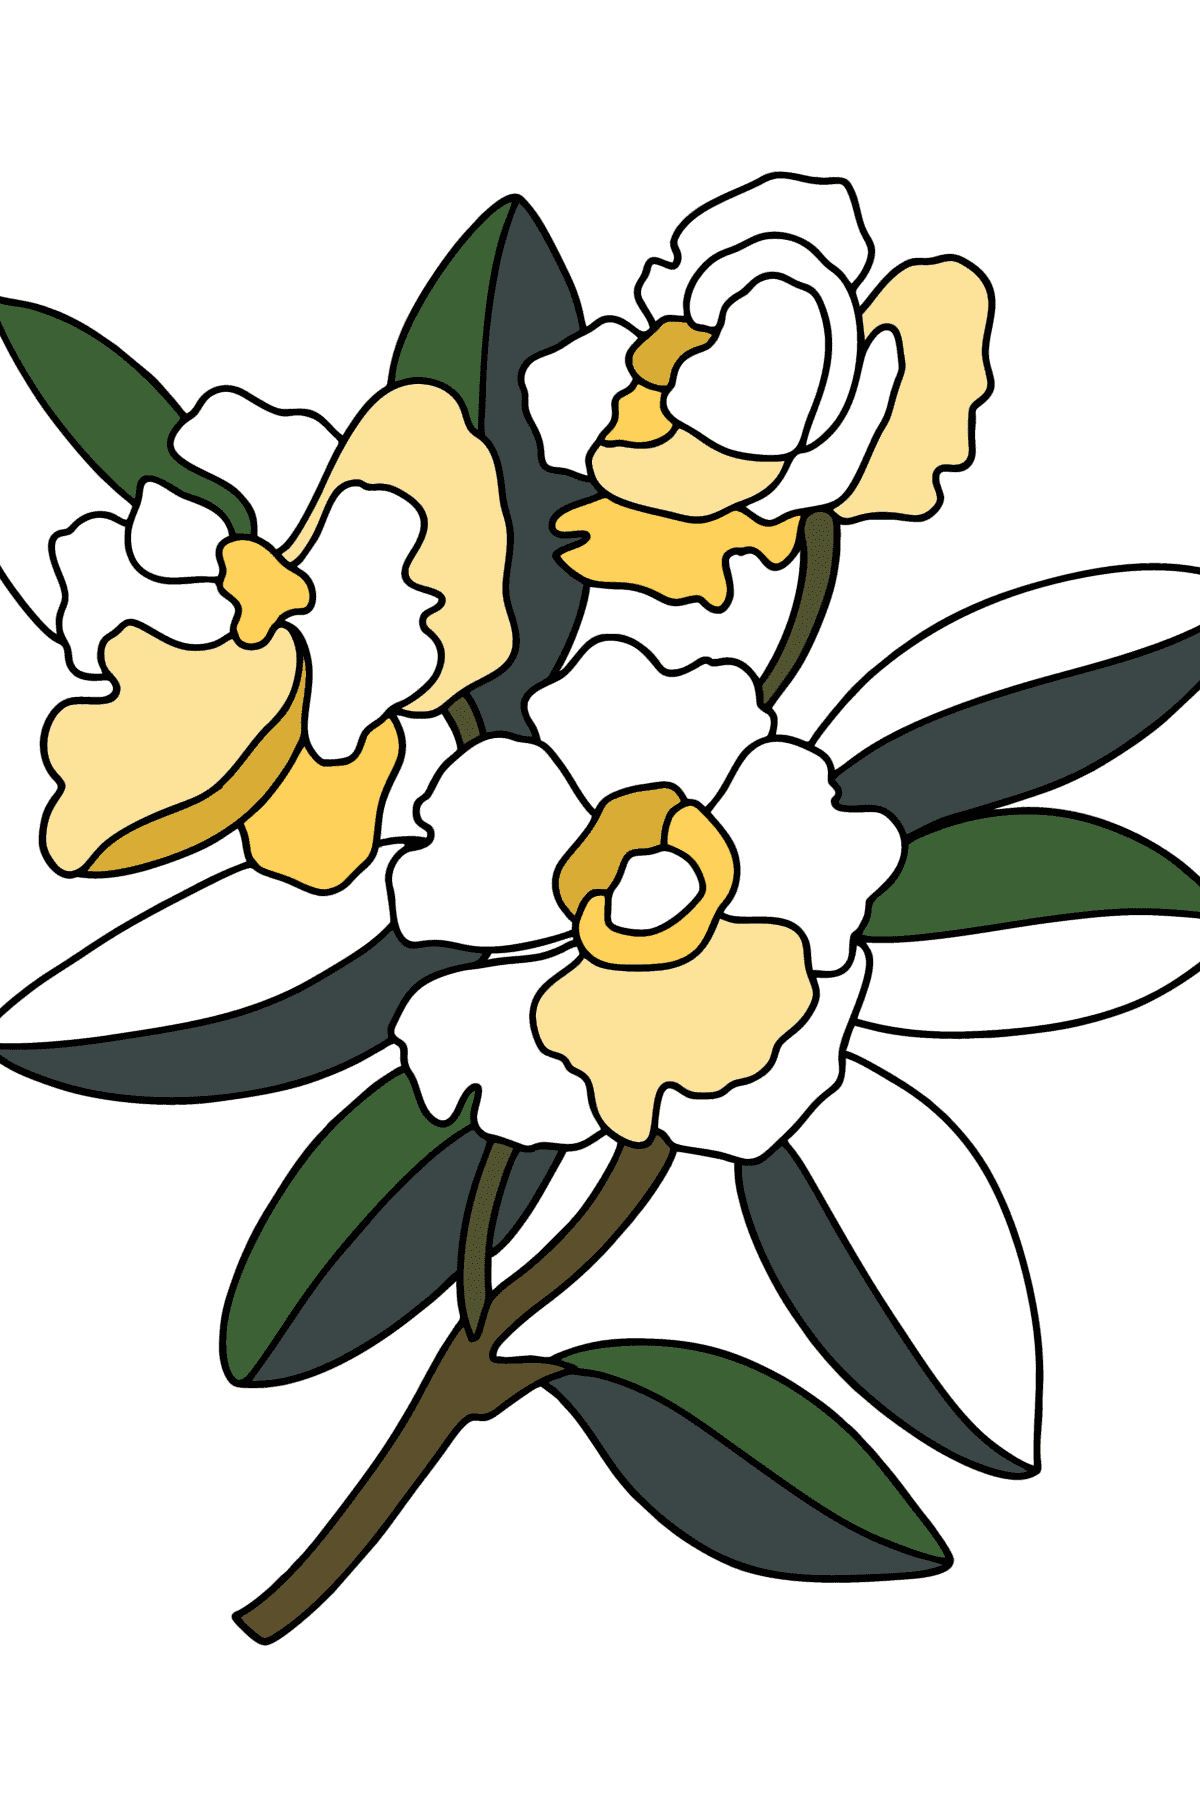 Gardenia coloring page - Coloring Pages for Kids